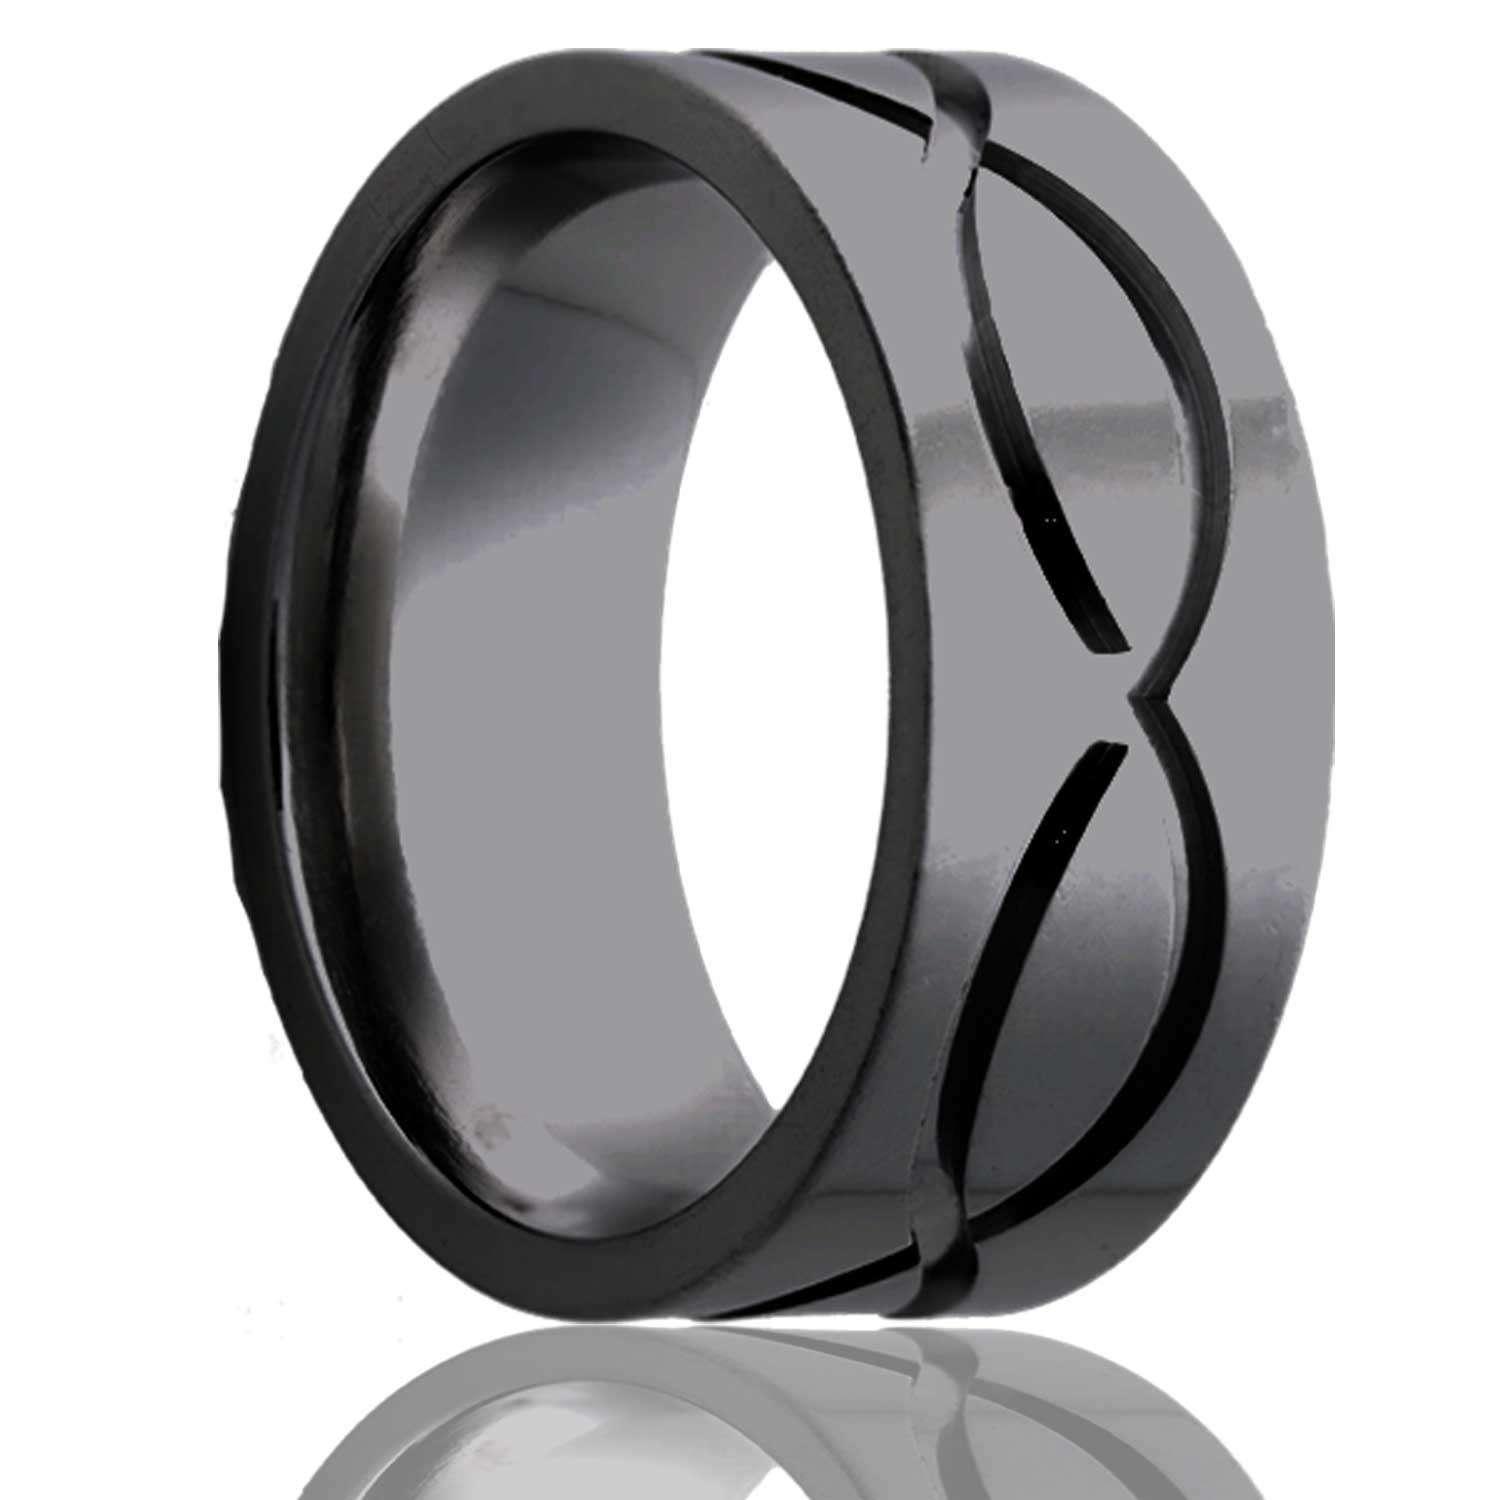 A infinity waves zirconium men's wedding band displayed on a neutral white background.